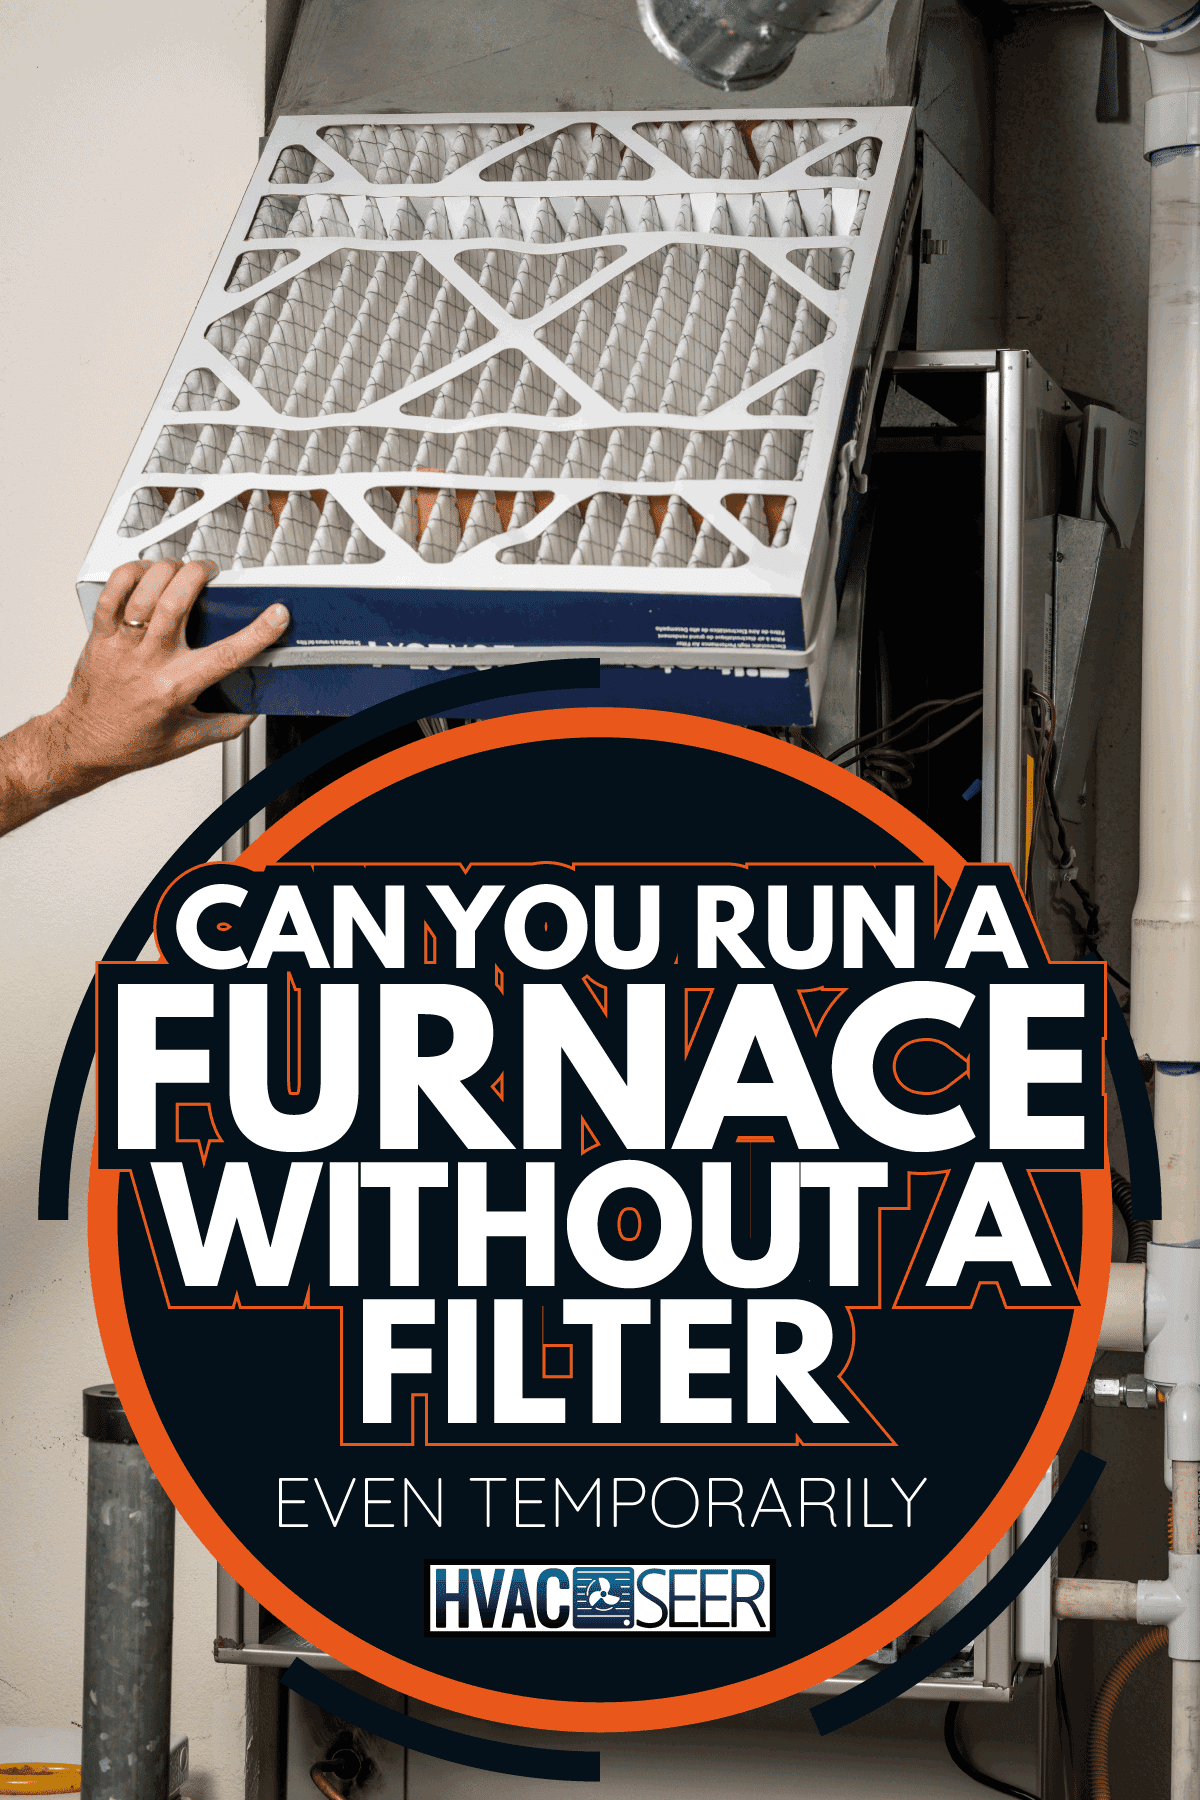 Home maintenance with the replacement of a furnace filter. Can You Run A Furnace Without A Filter [Even Temporarily]